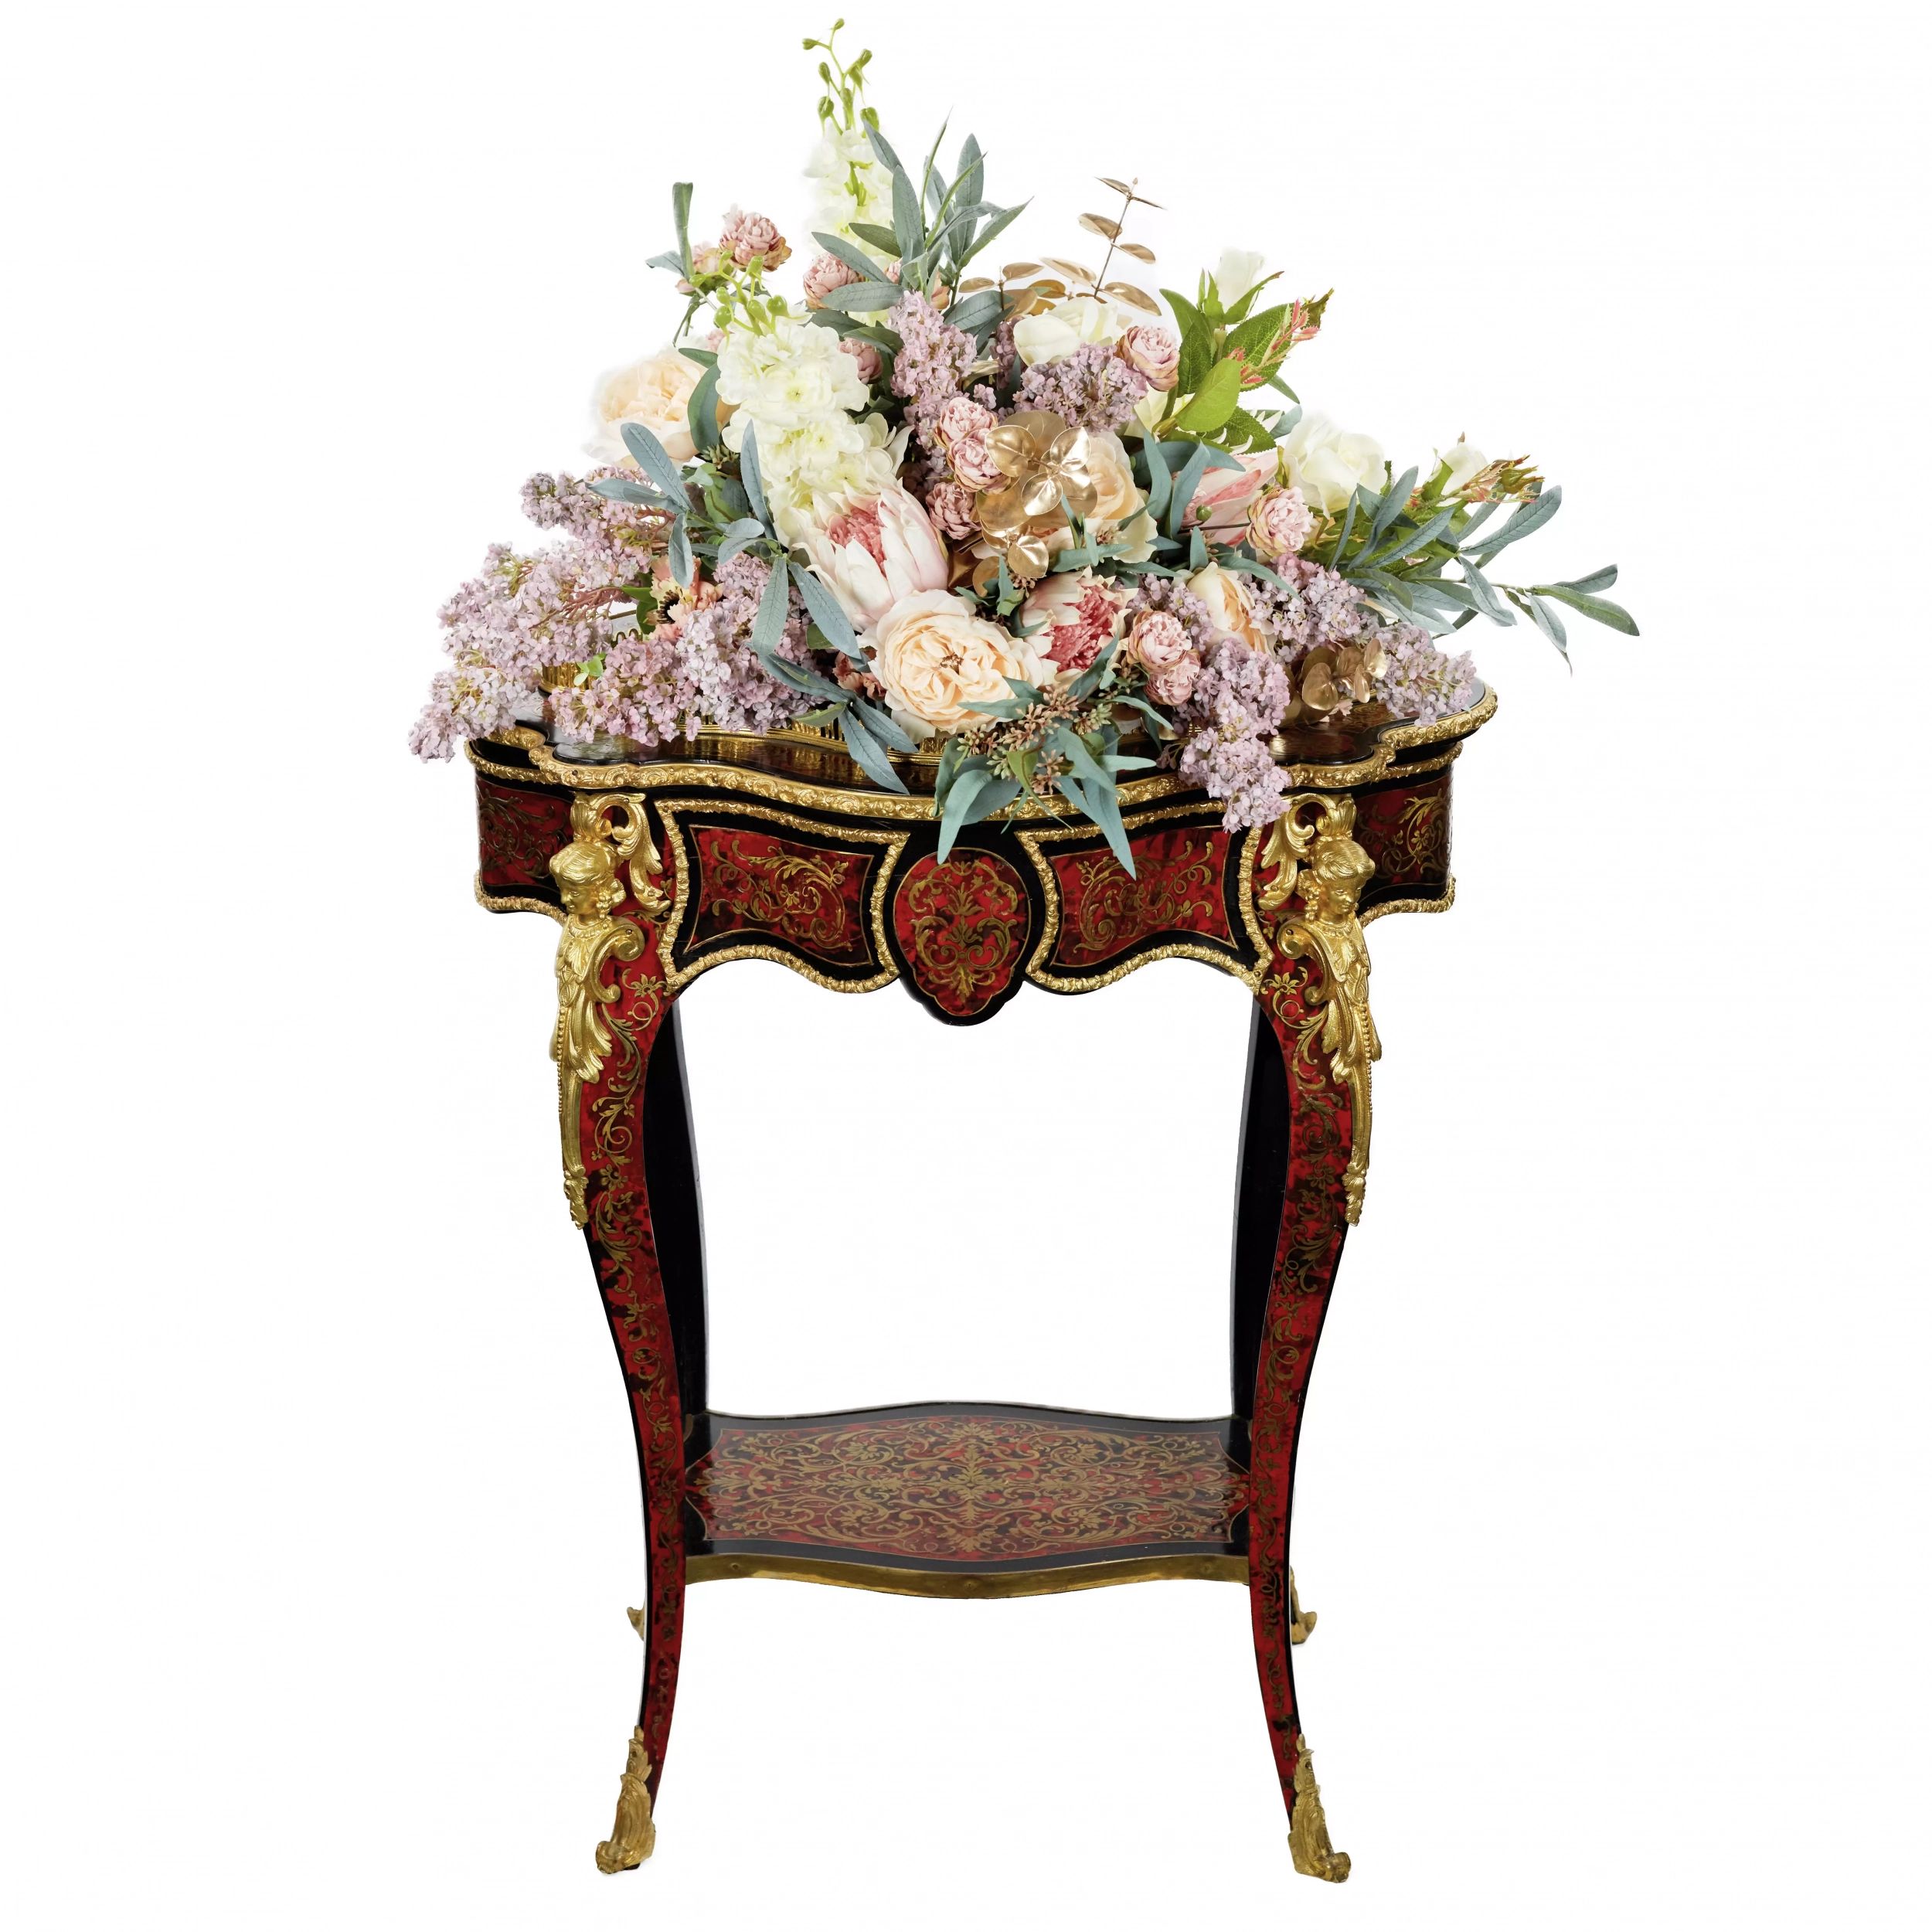 A-magnificent-jardiniere-from-the-Napoleon-III-period-made-in-the-Boulle-style-